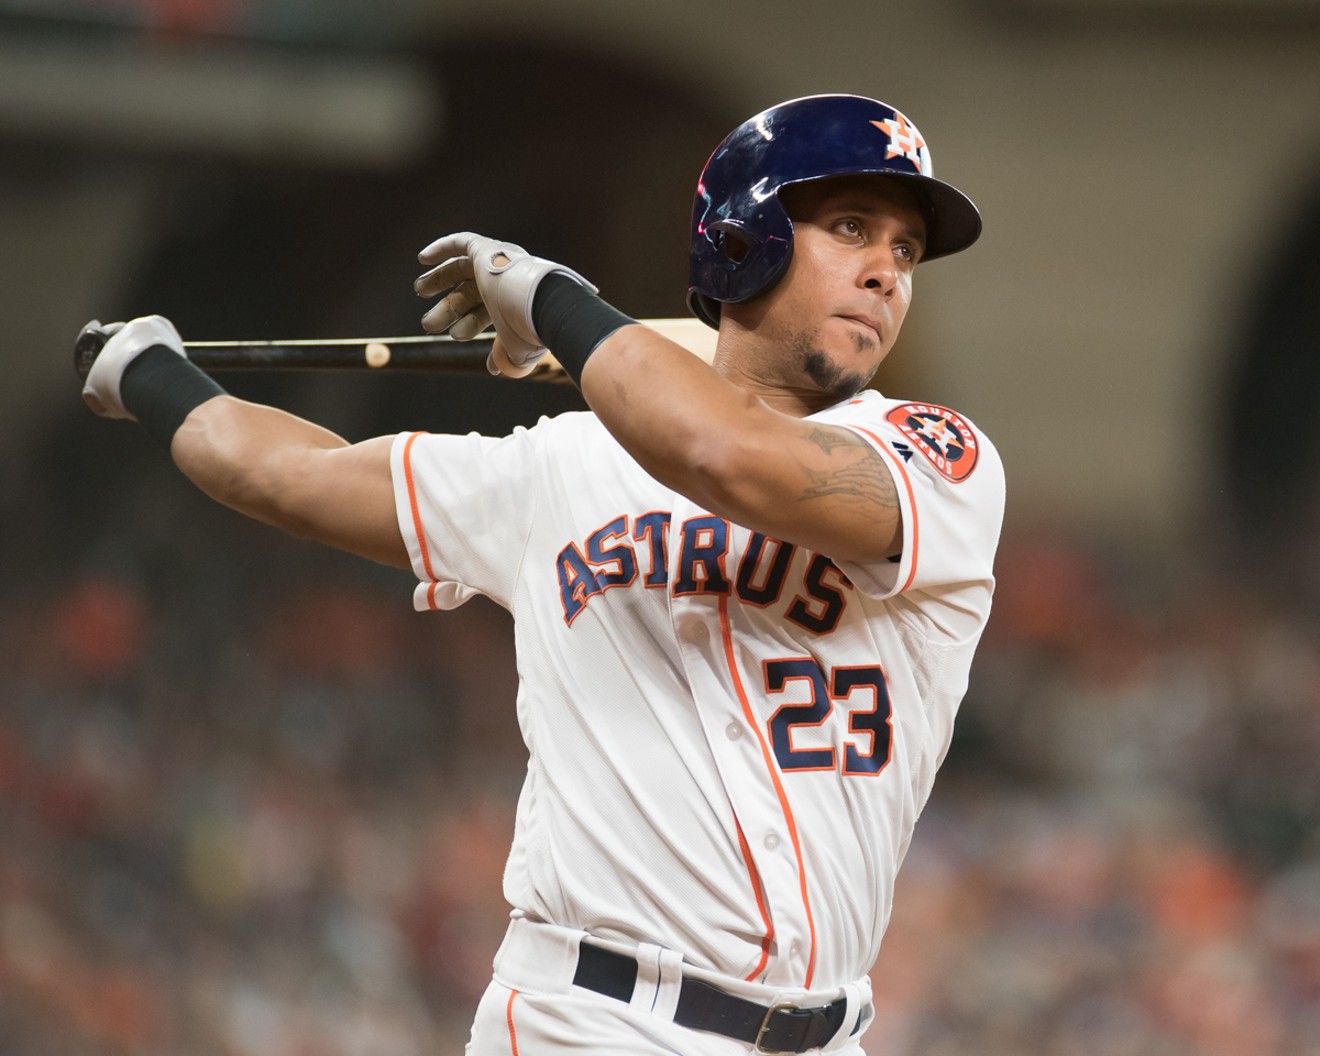 How influential is Michael Brantley to the Astros? We'll let his